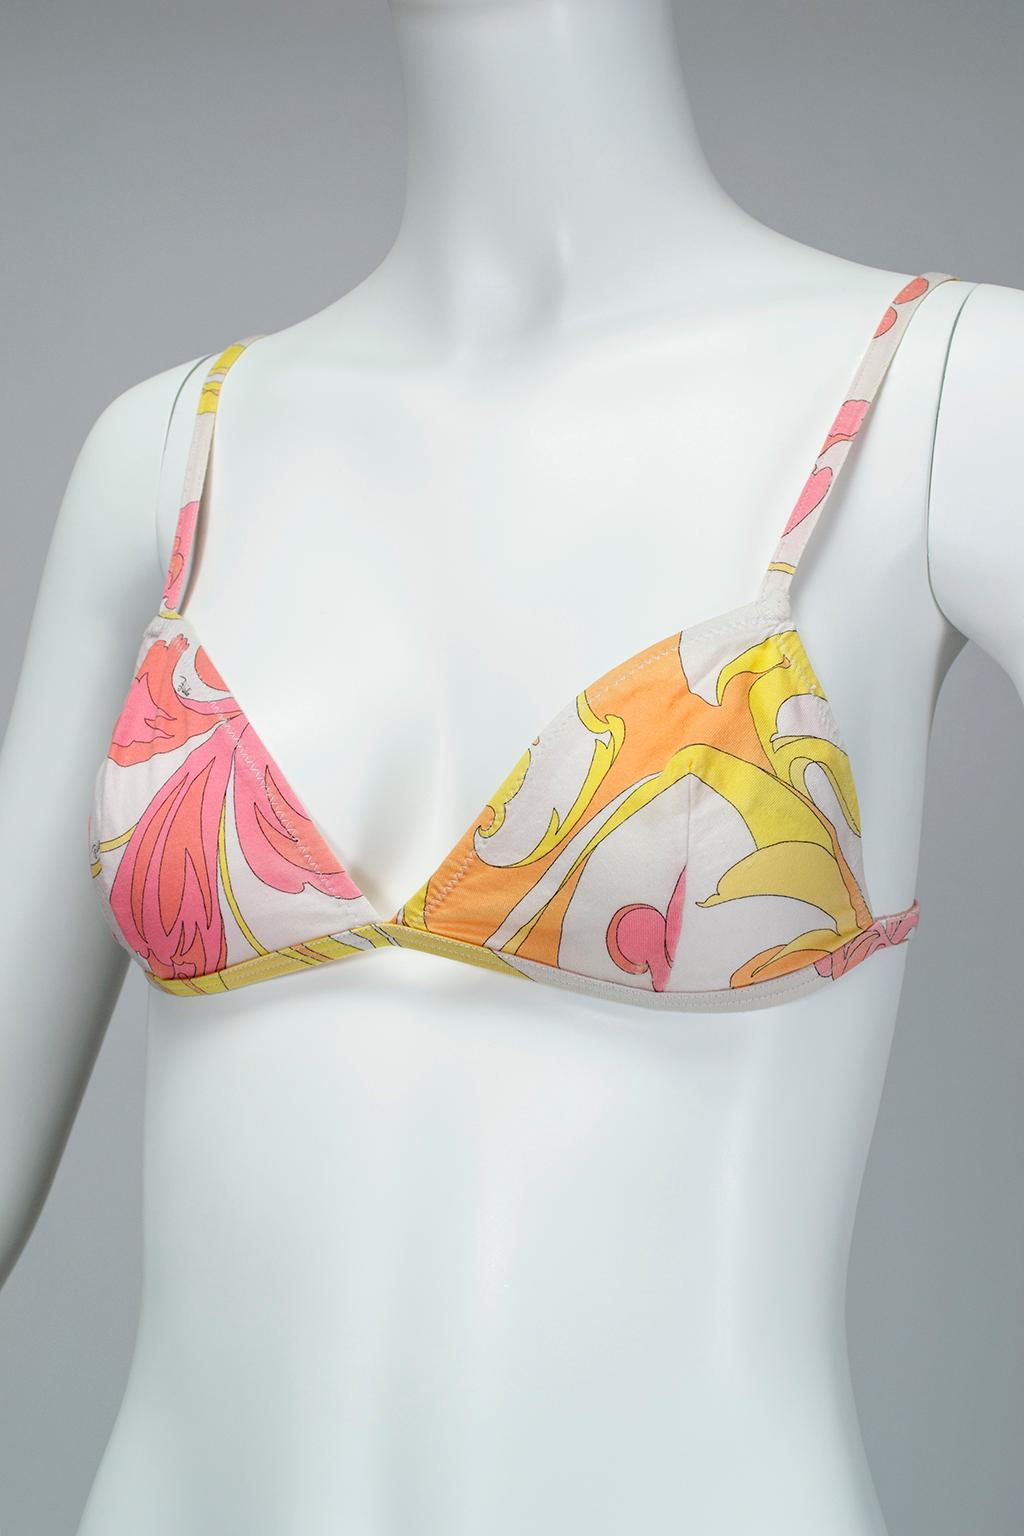 Emilio Pucci Pink Yellow Psychedelic Lounge Bra and Panty Set- S-M, 21st Century In Excellent Condition For Sale In Tucson, AZ